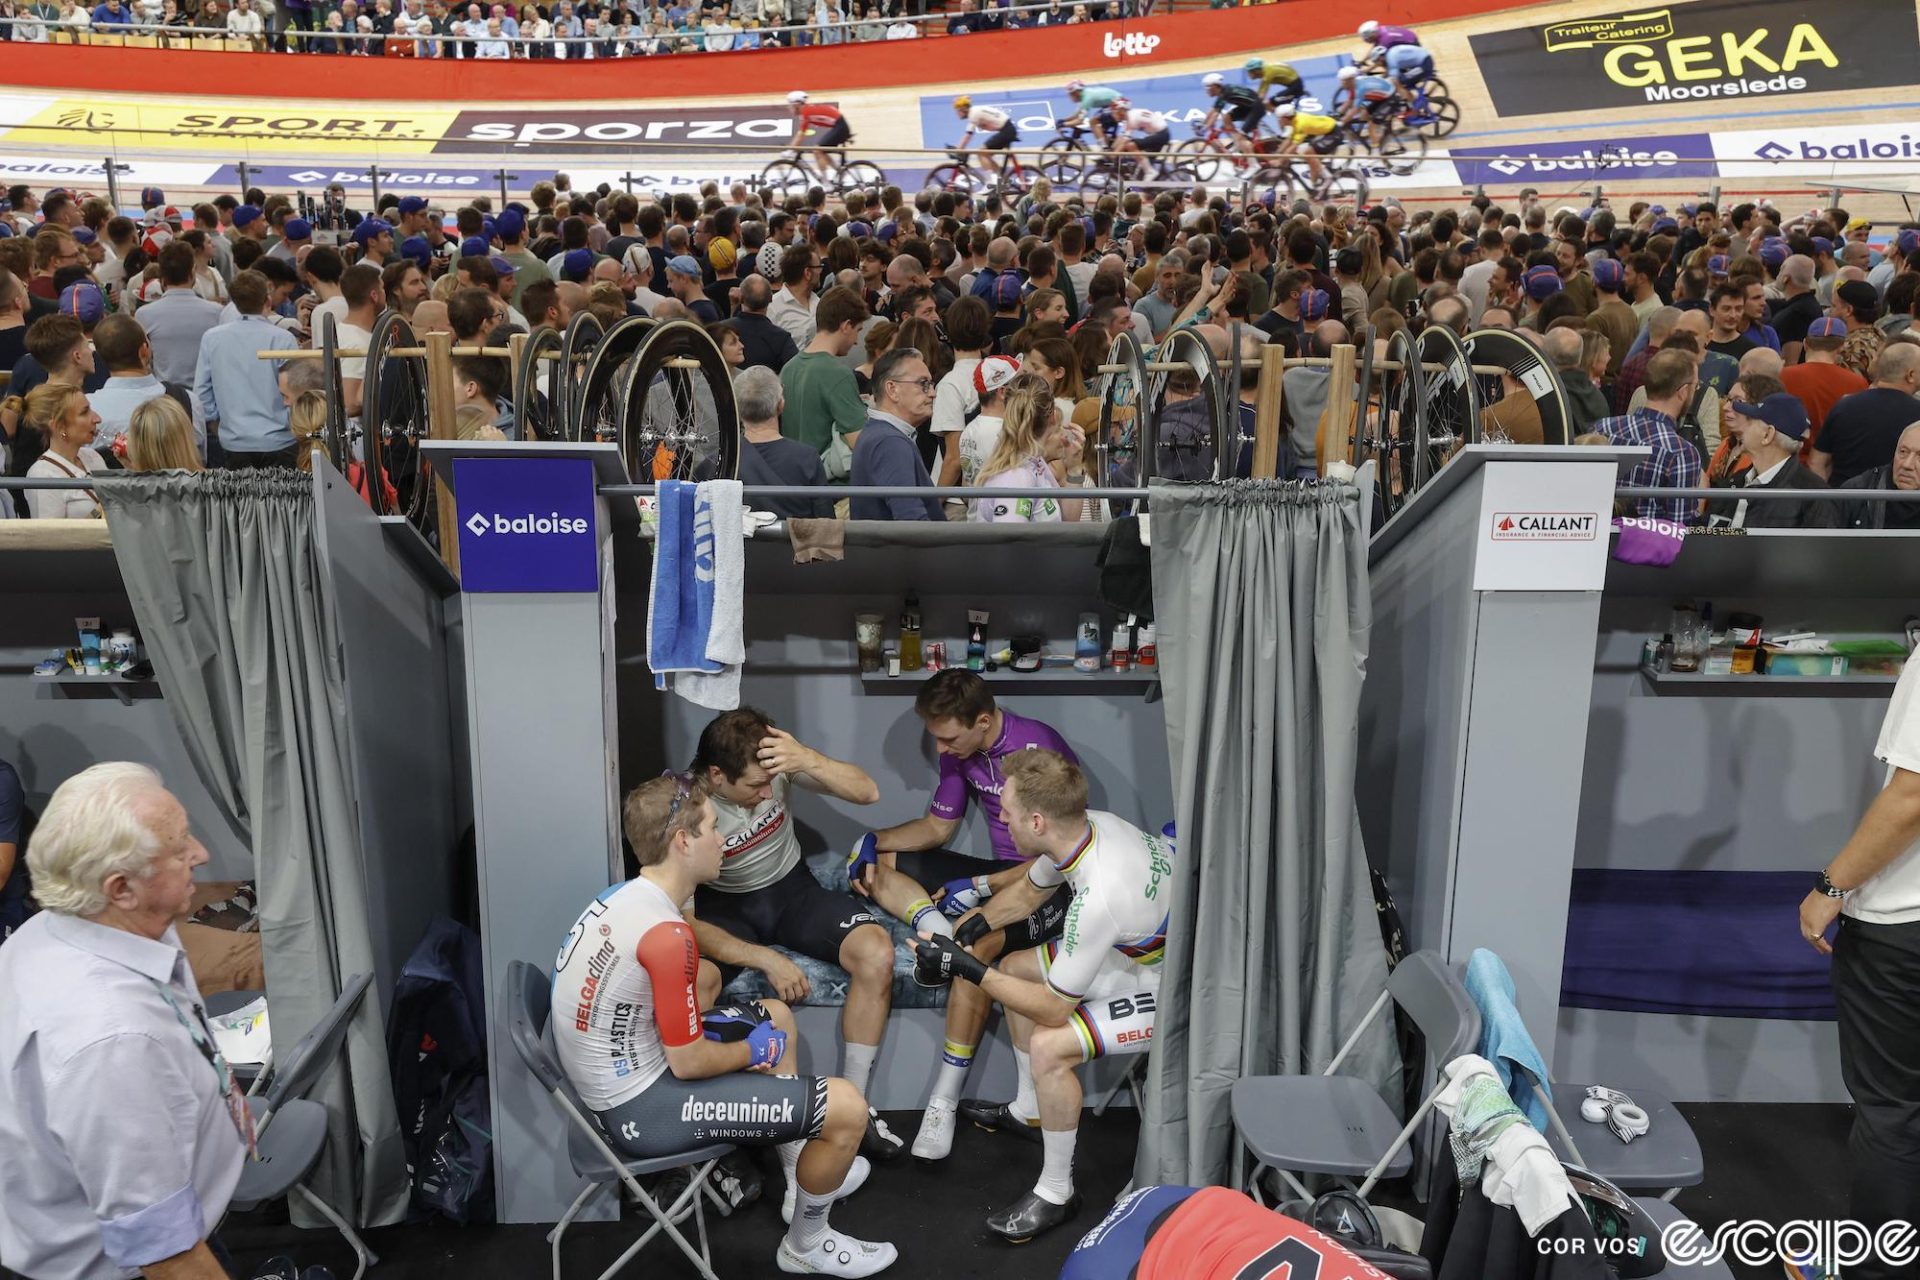 Four racers sit in a circle in an infield cabin, two on the bed and two on folding chairs. Behind them, the race continues with their teammates.